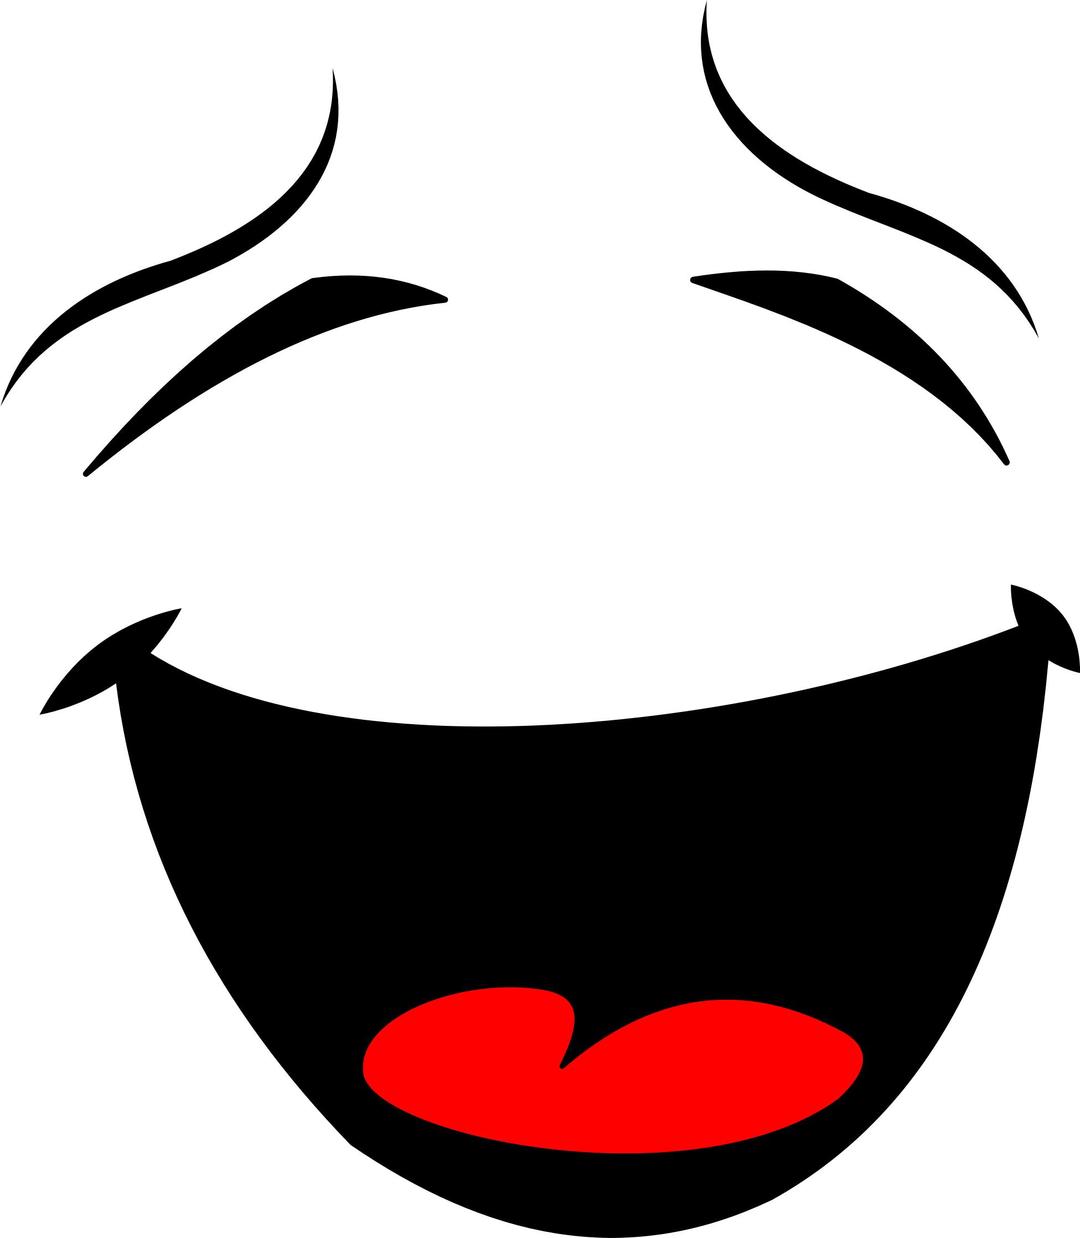 Laughing Smiley Face Silhouette png transparent